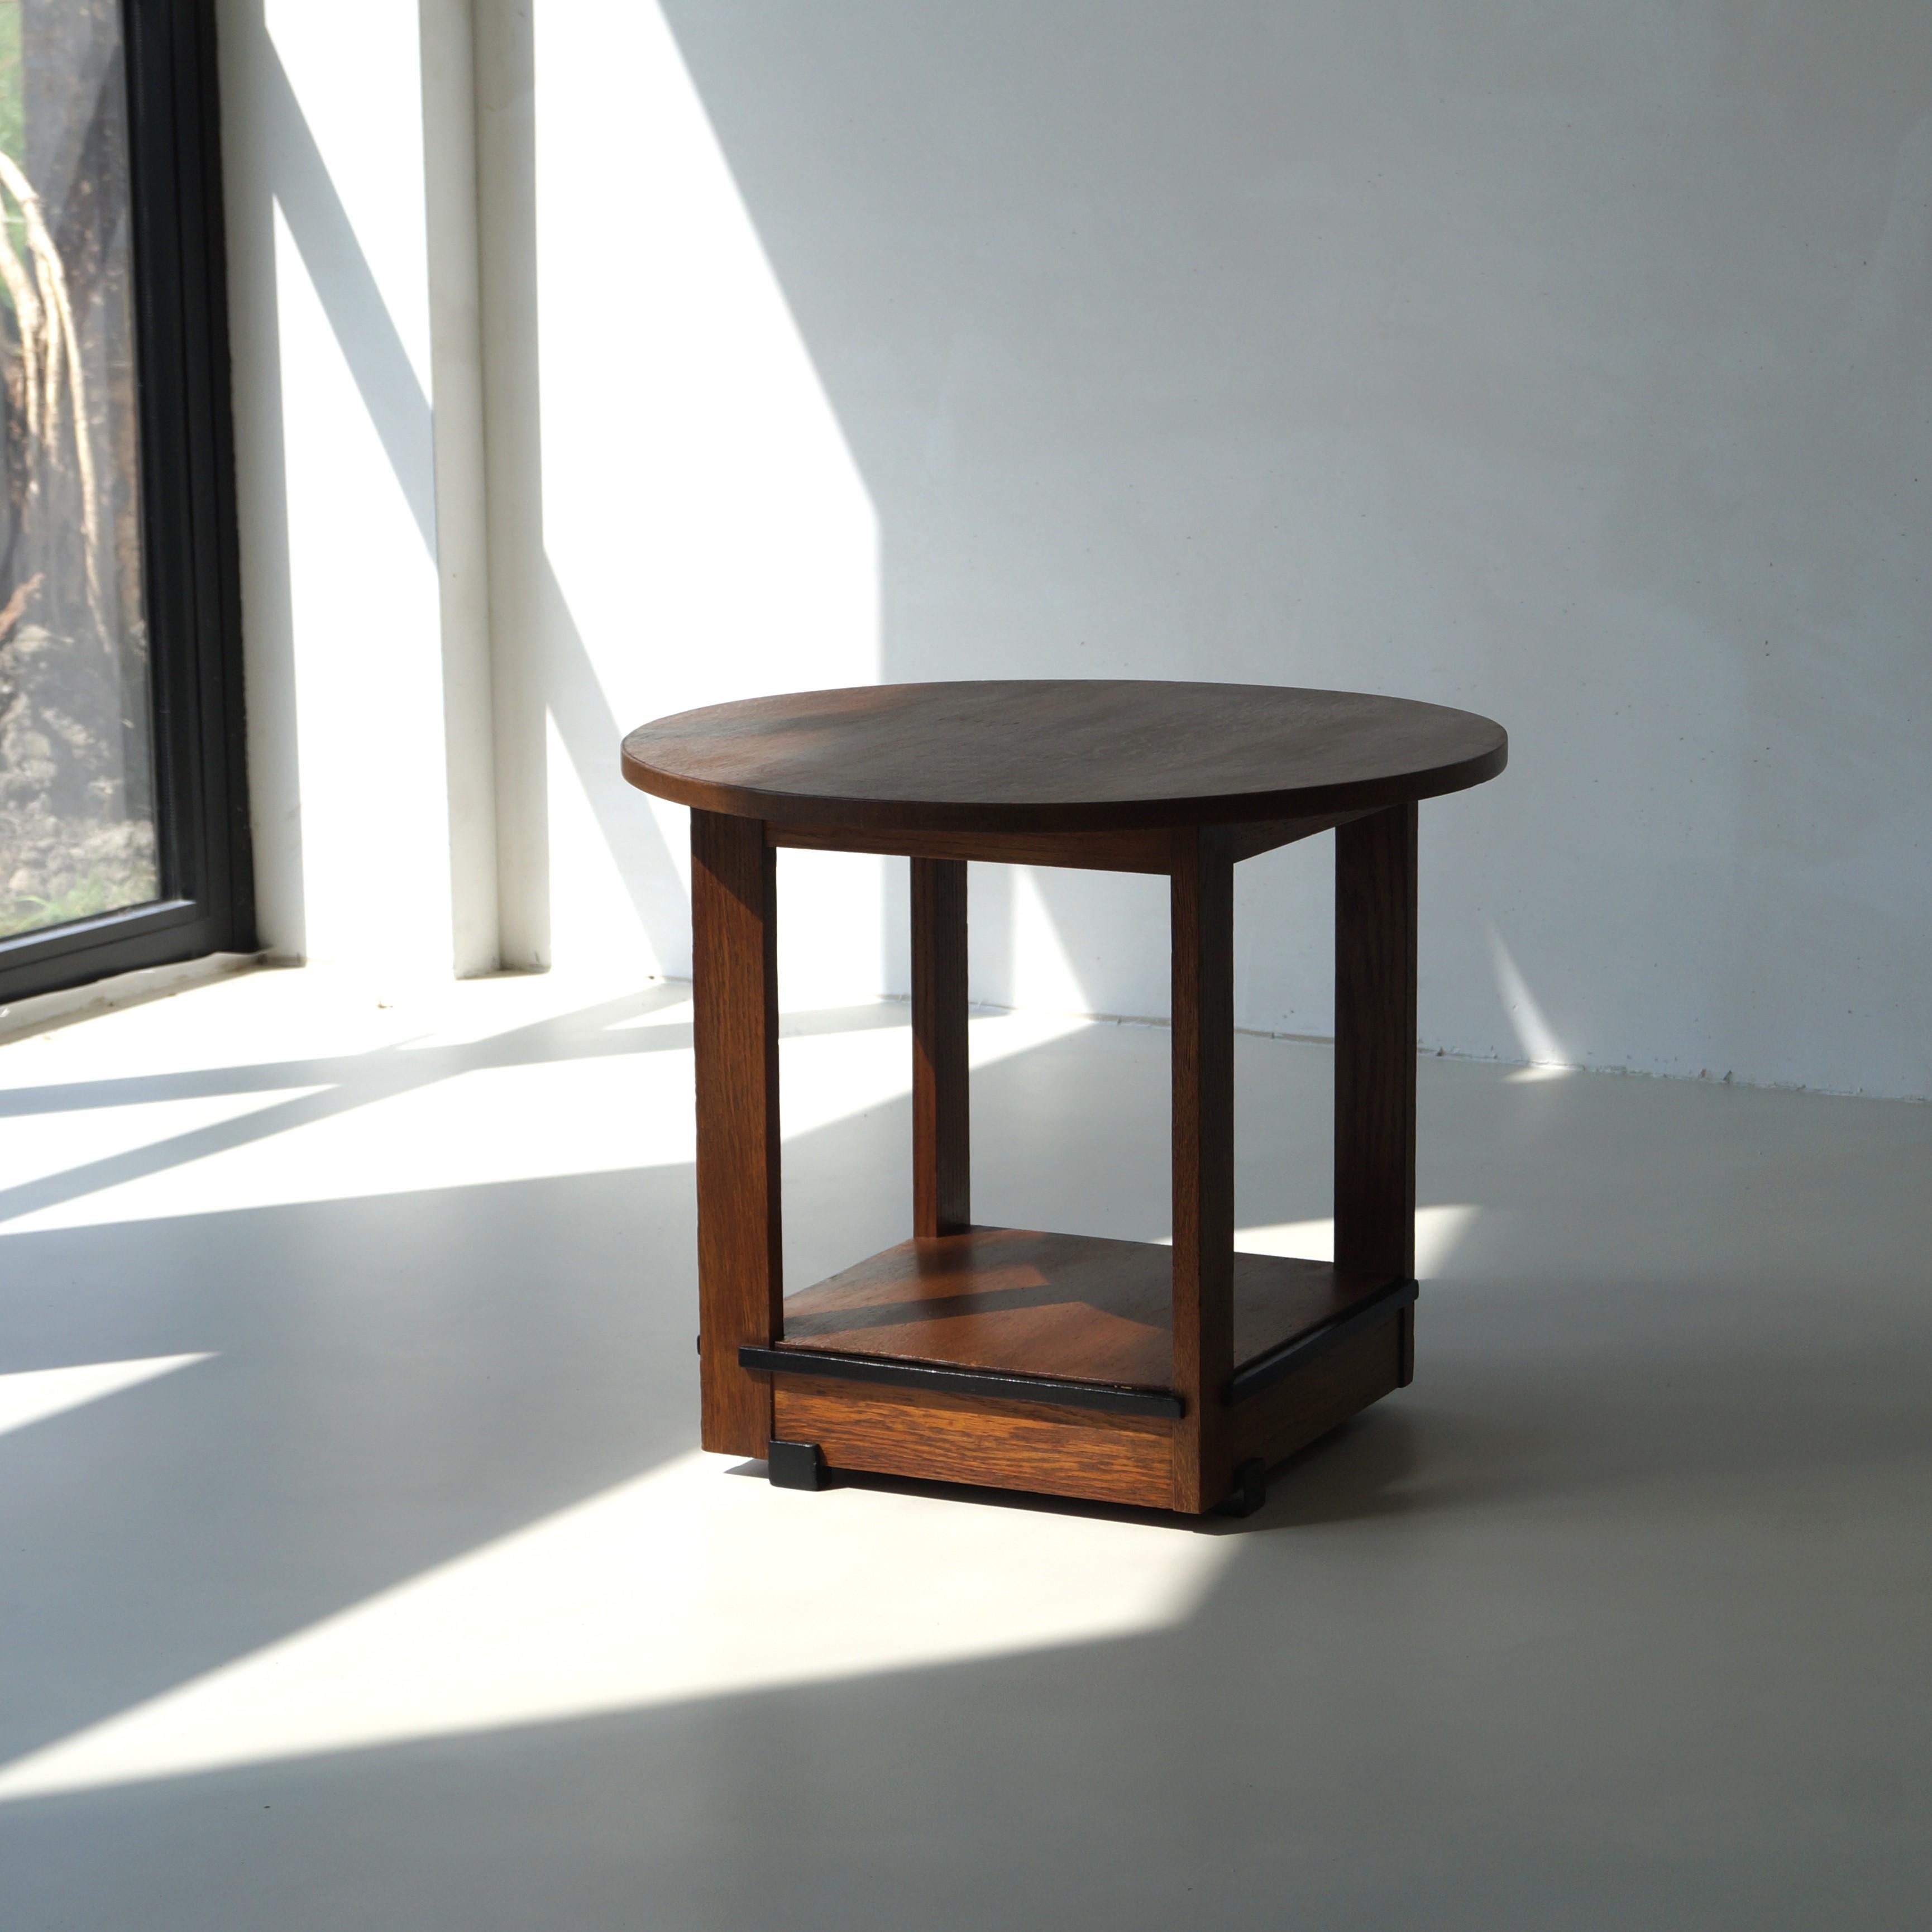 Modernist Dutch Art Deco occasional table attributed to Jan Brunott, 1920s For Sale 1